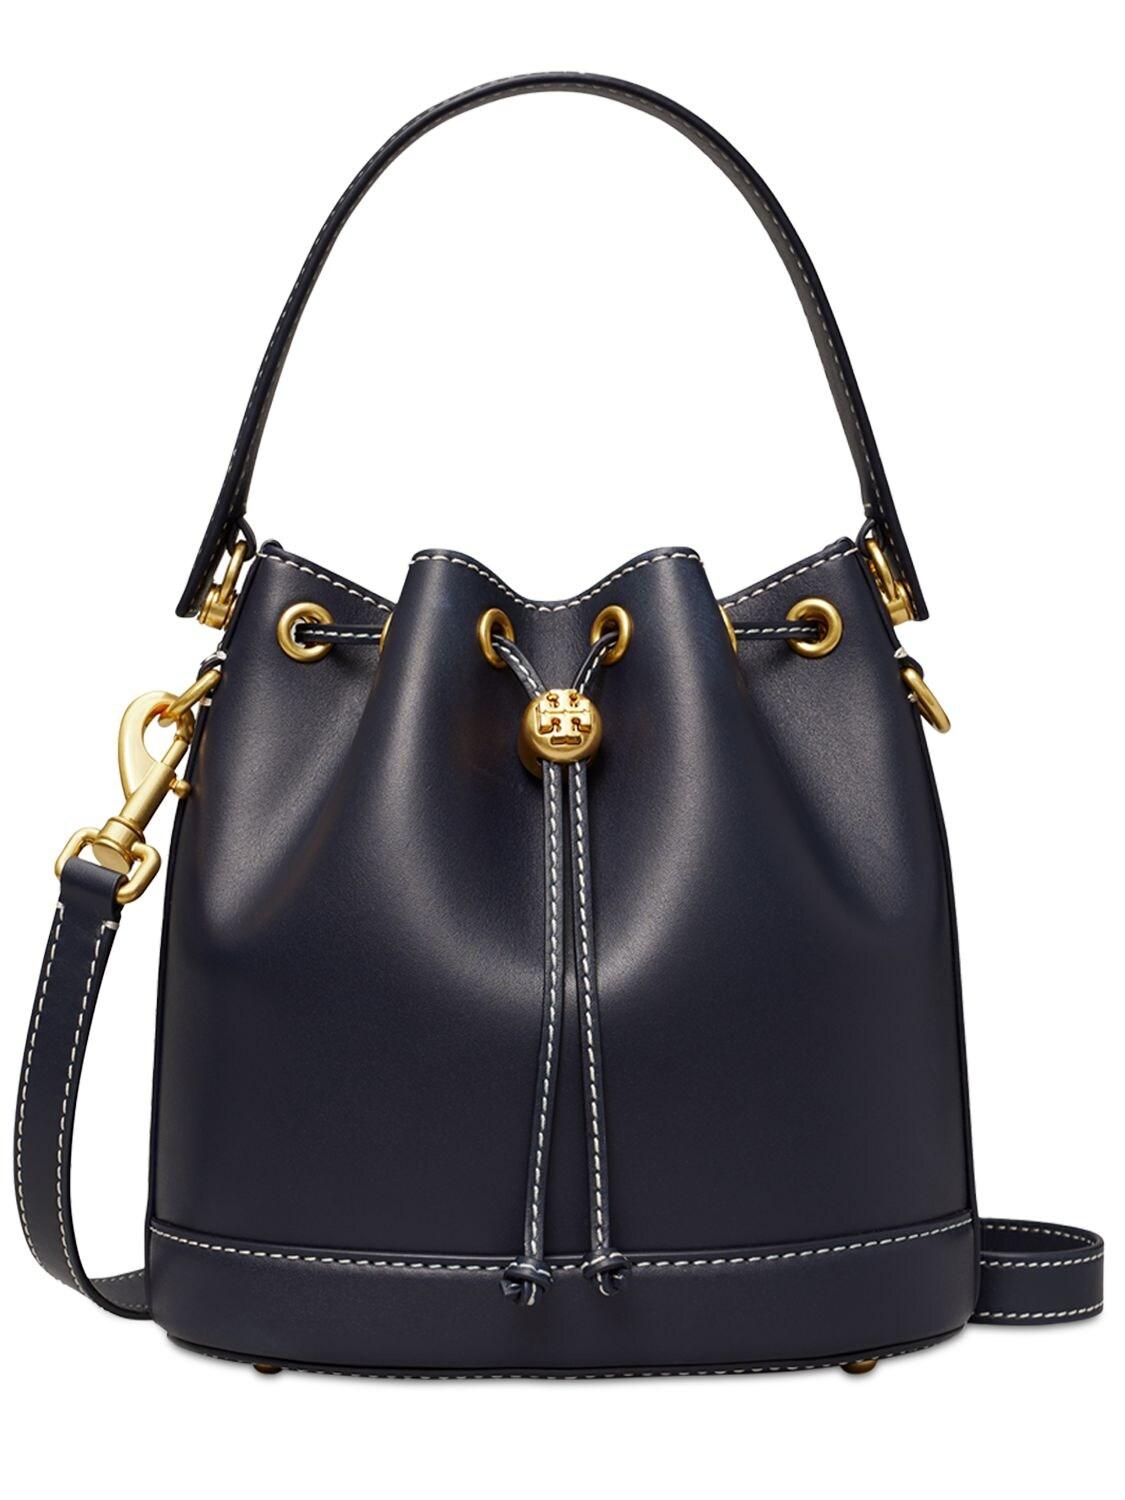 Tory Burch T Monogram Leather Bucket Bag in Blue